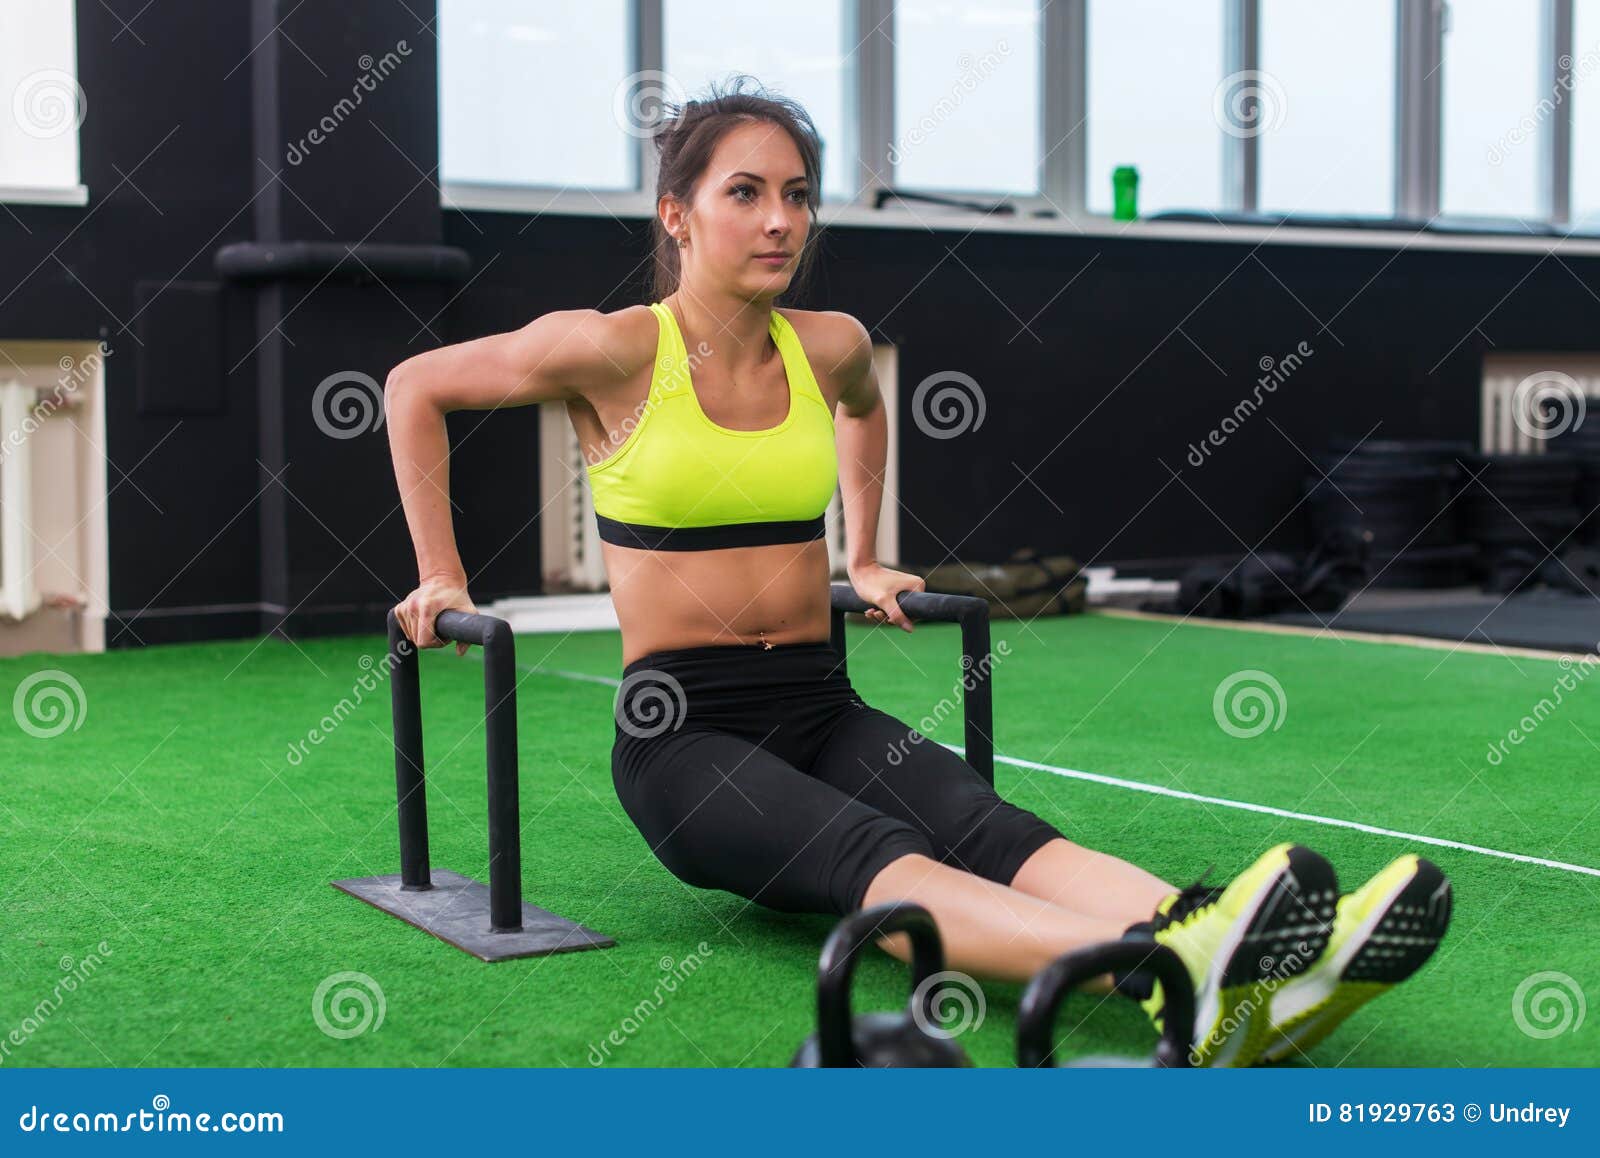 Fit Strong Woman Doing L-sits Work-out in Gym, Lifting Up Her Legs, Using  Parallel Bars Stock Image - Image of muscle, effort: 81929763